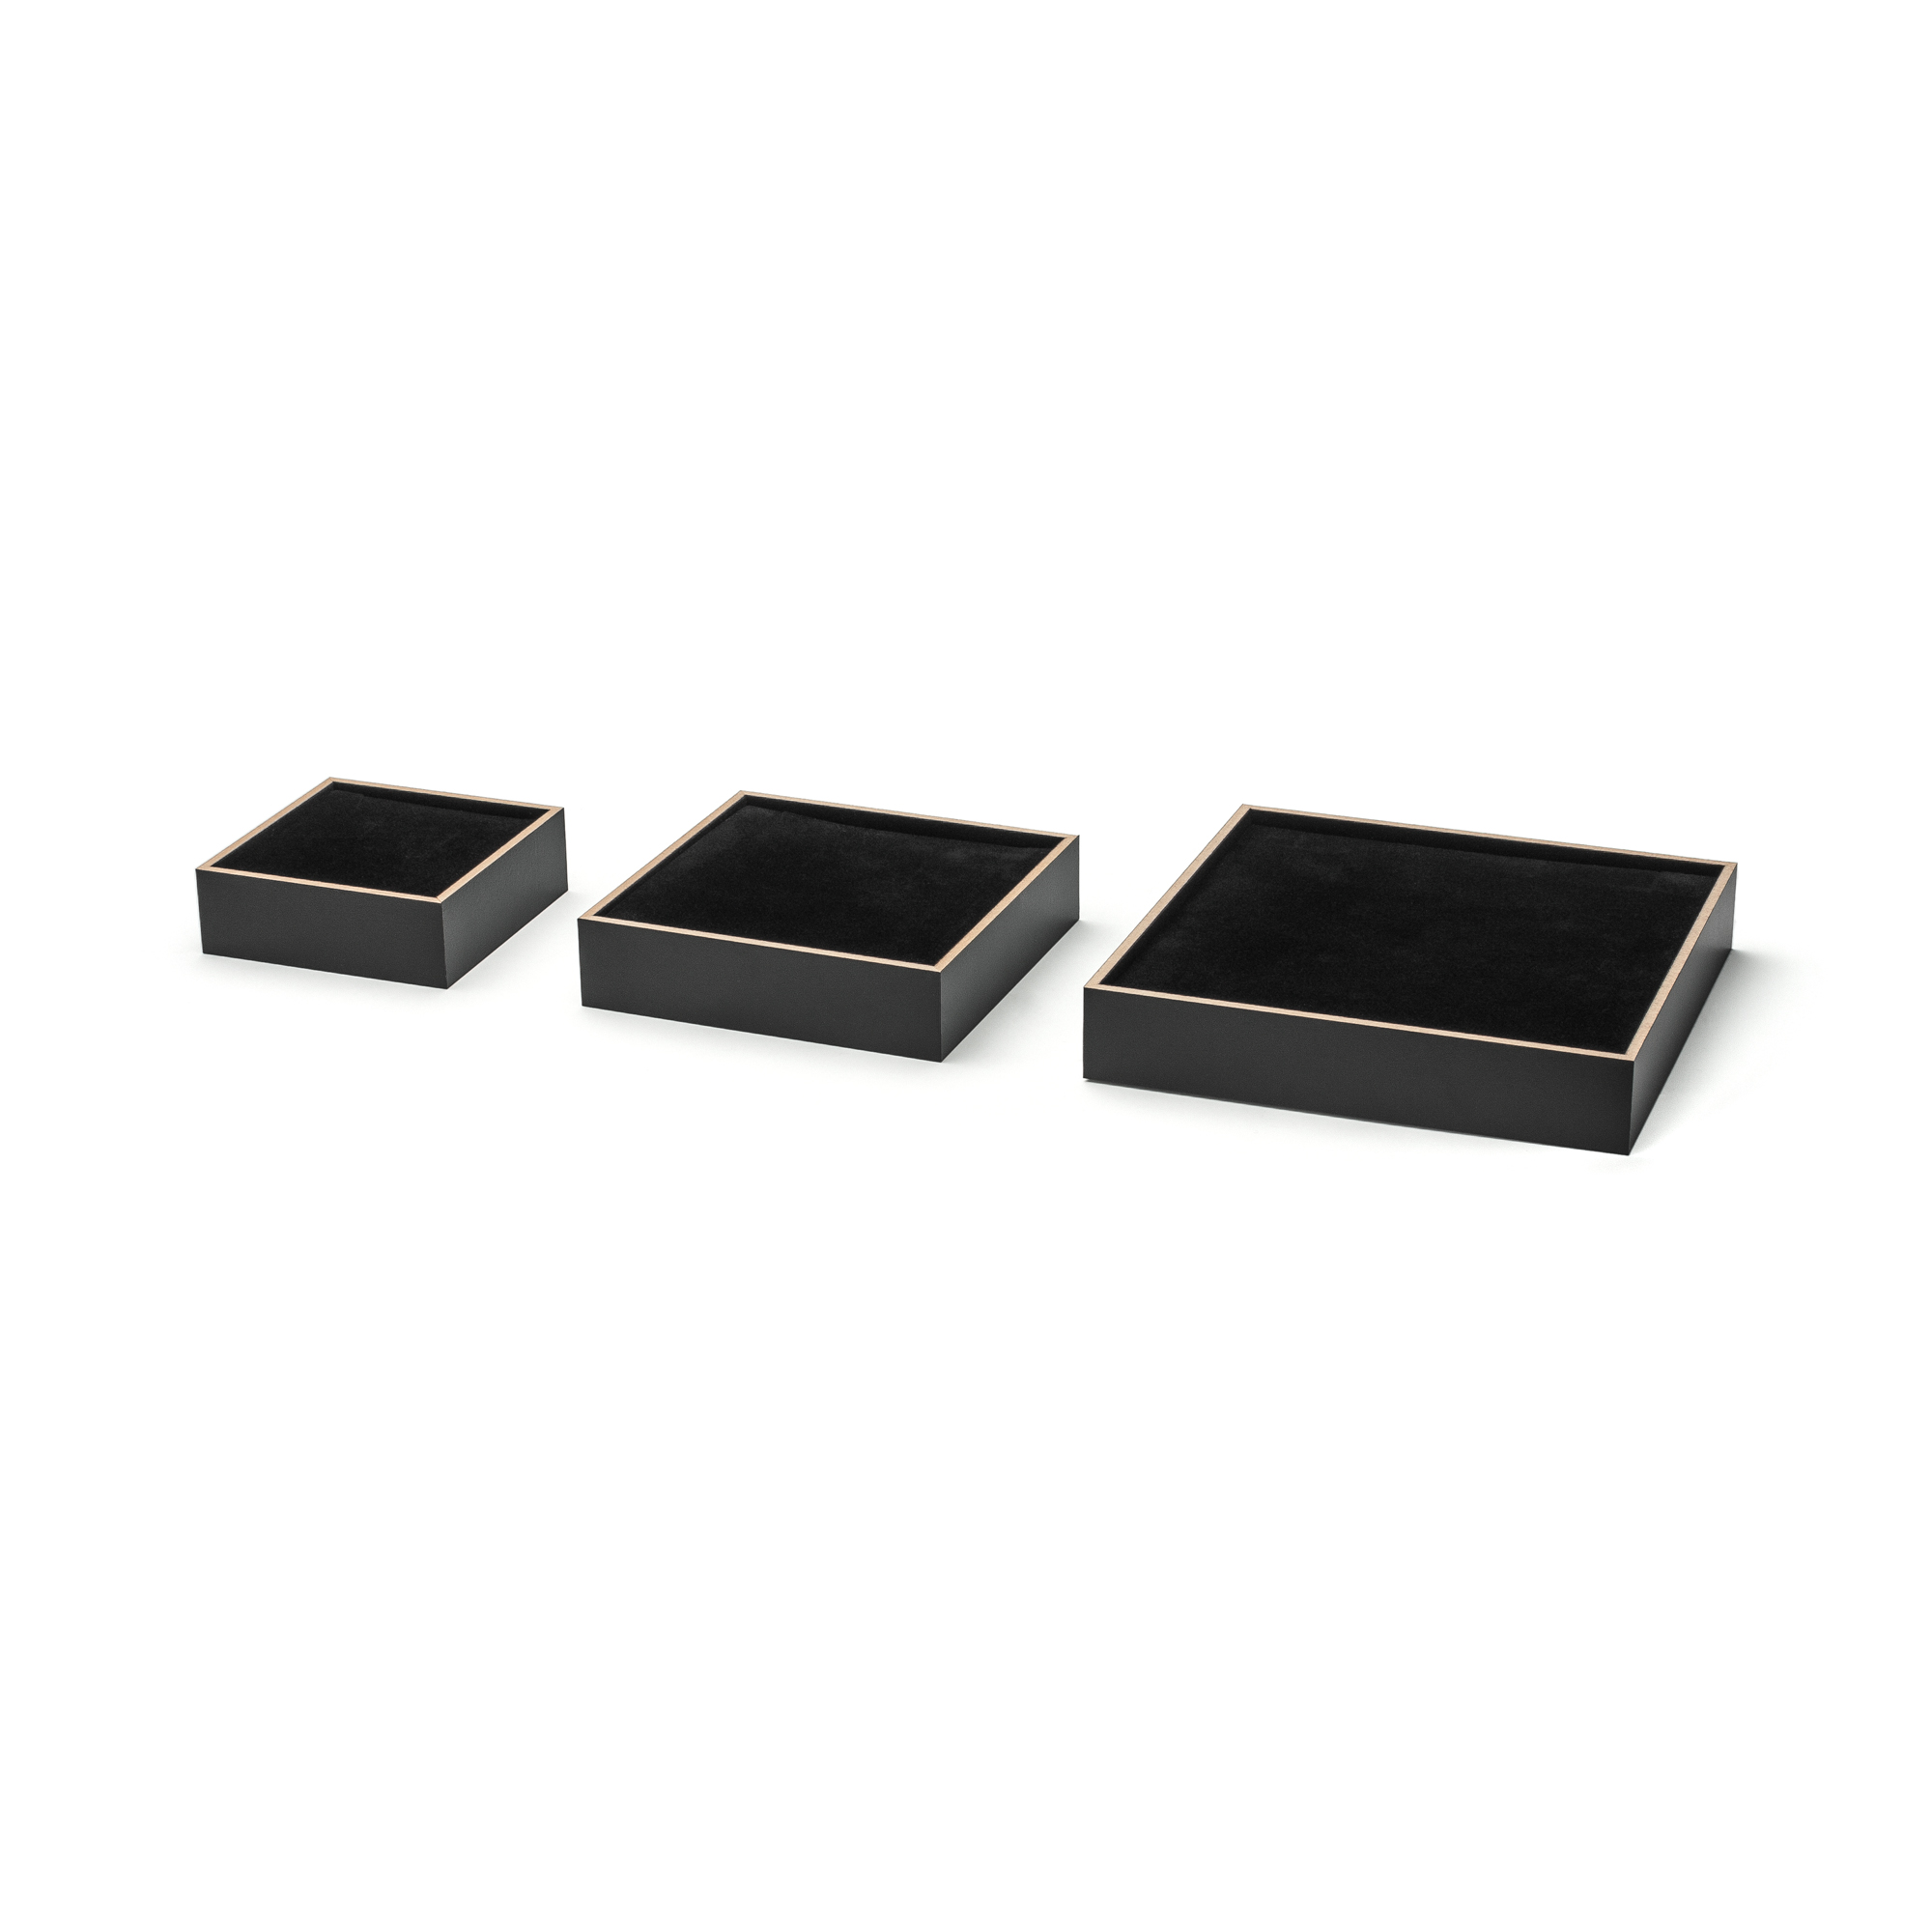 BlackCube Display, 3-piece set of MDF-cubes with black foam inlay each